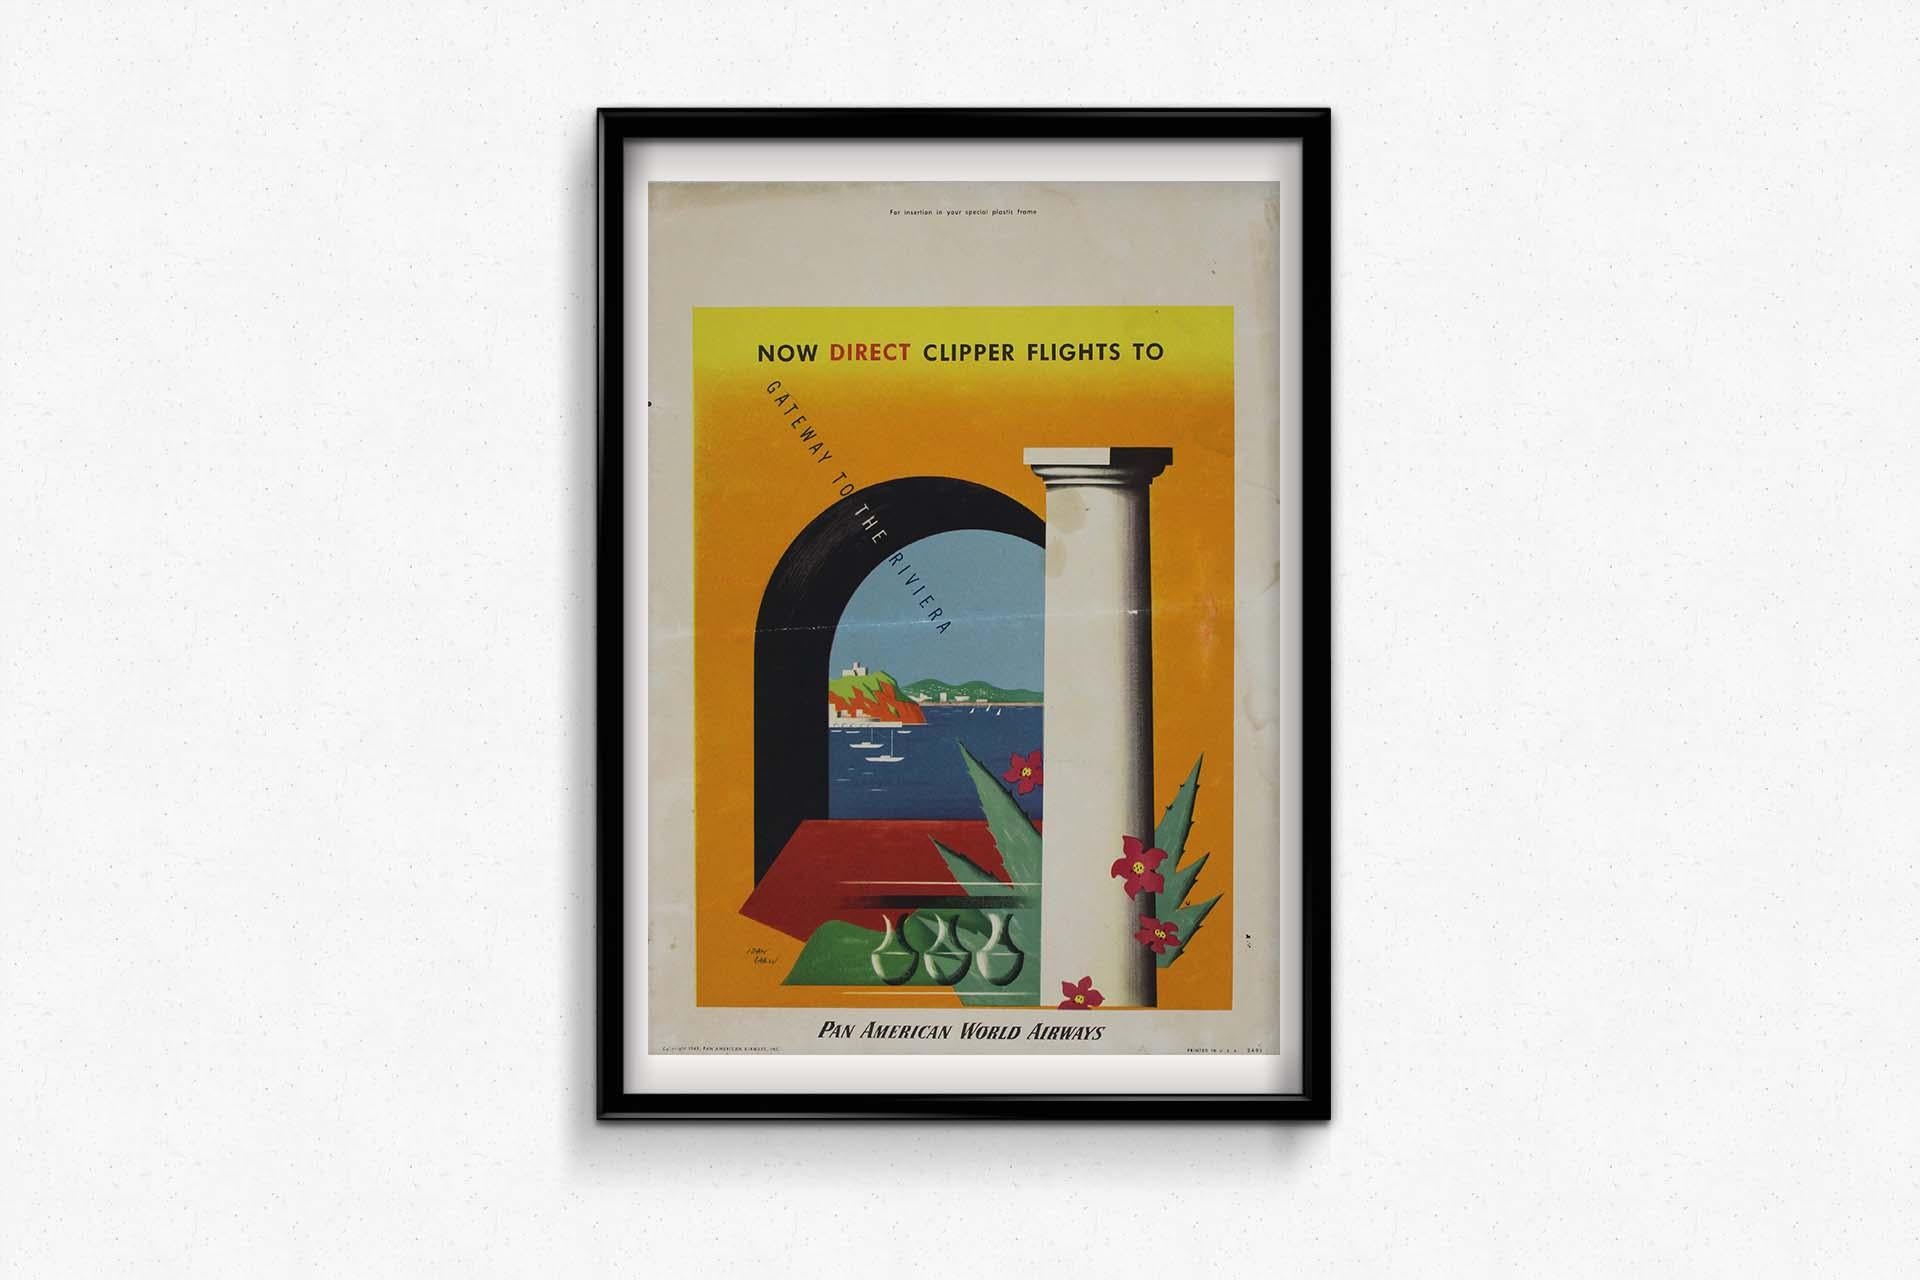 The 1949 original travel poster by Jean Carlu for Pan American World Airways offers a captivating invitation to explore the stunning beauty and sophistication of the French Riviera. Jean Carlu, a renowned French graphic designer and poster artist,